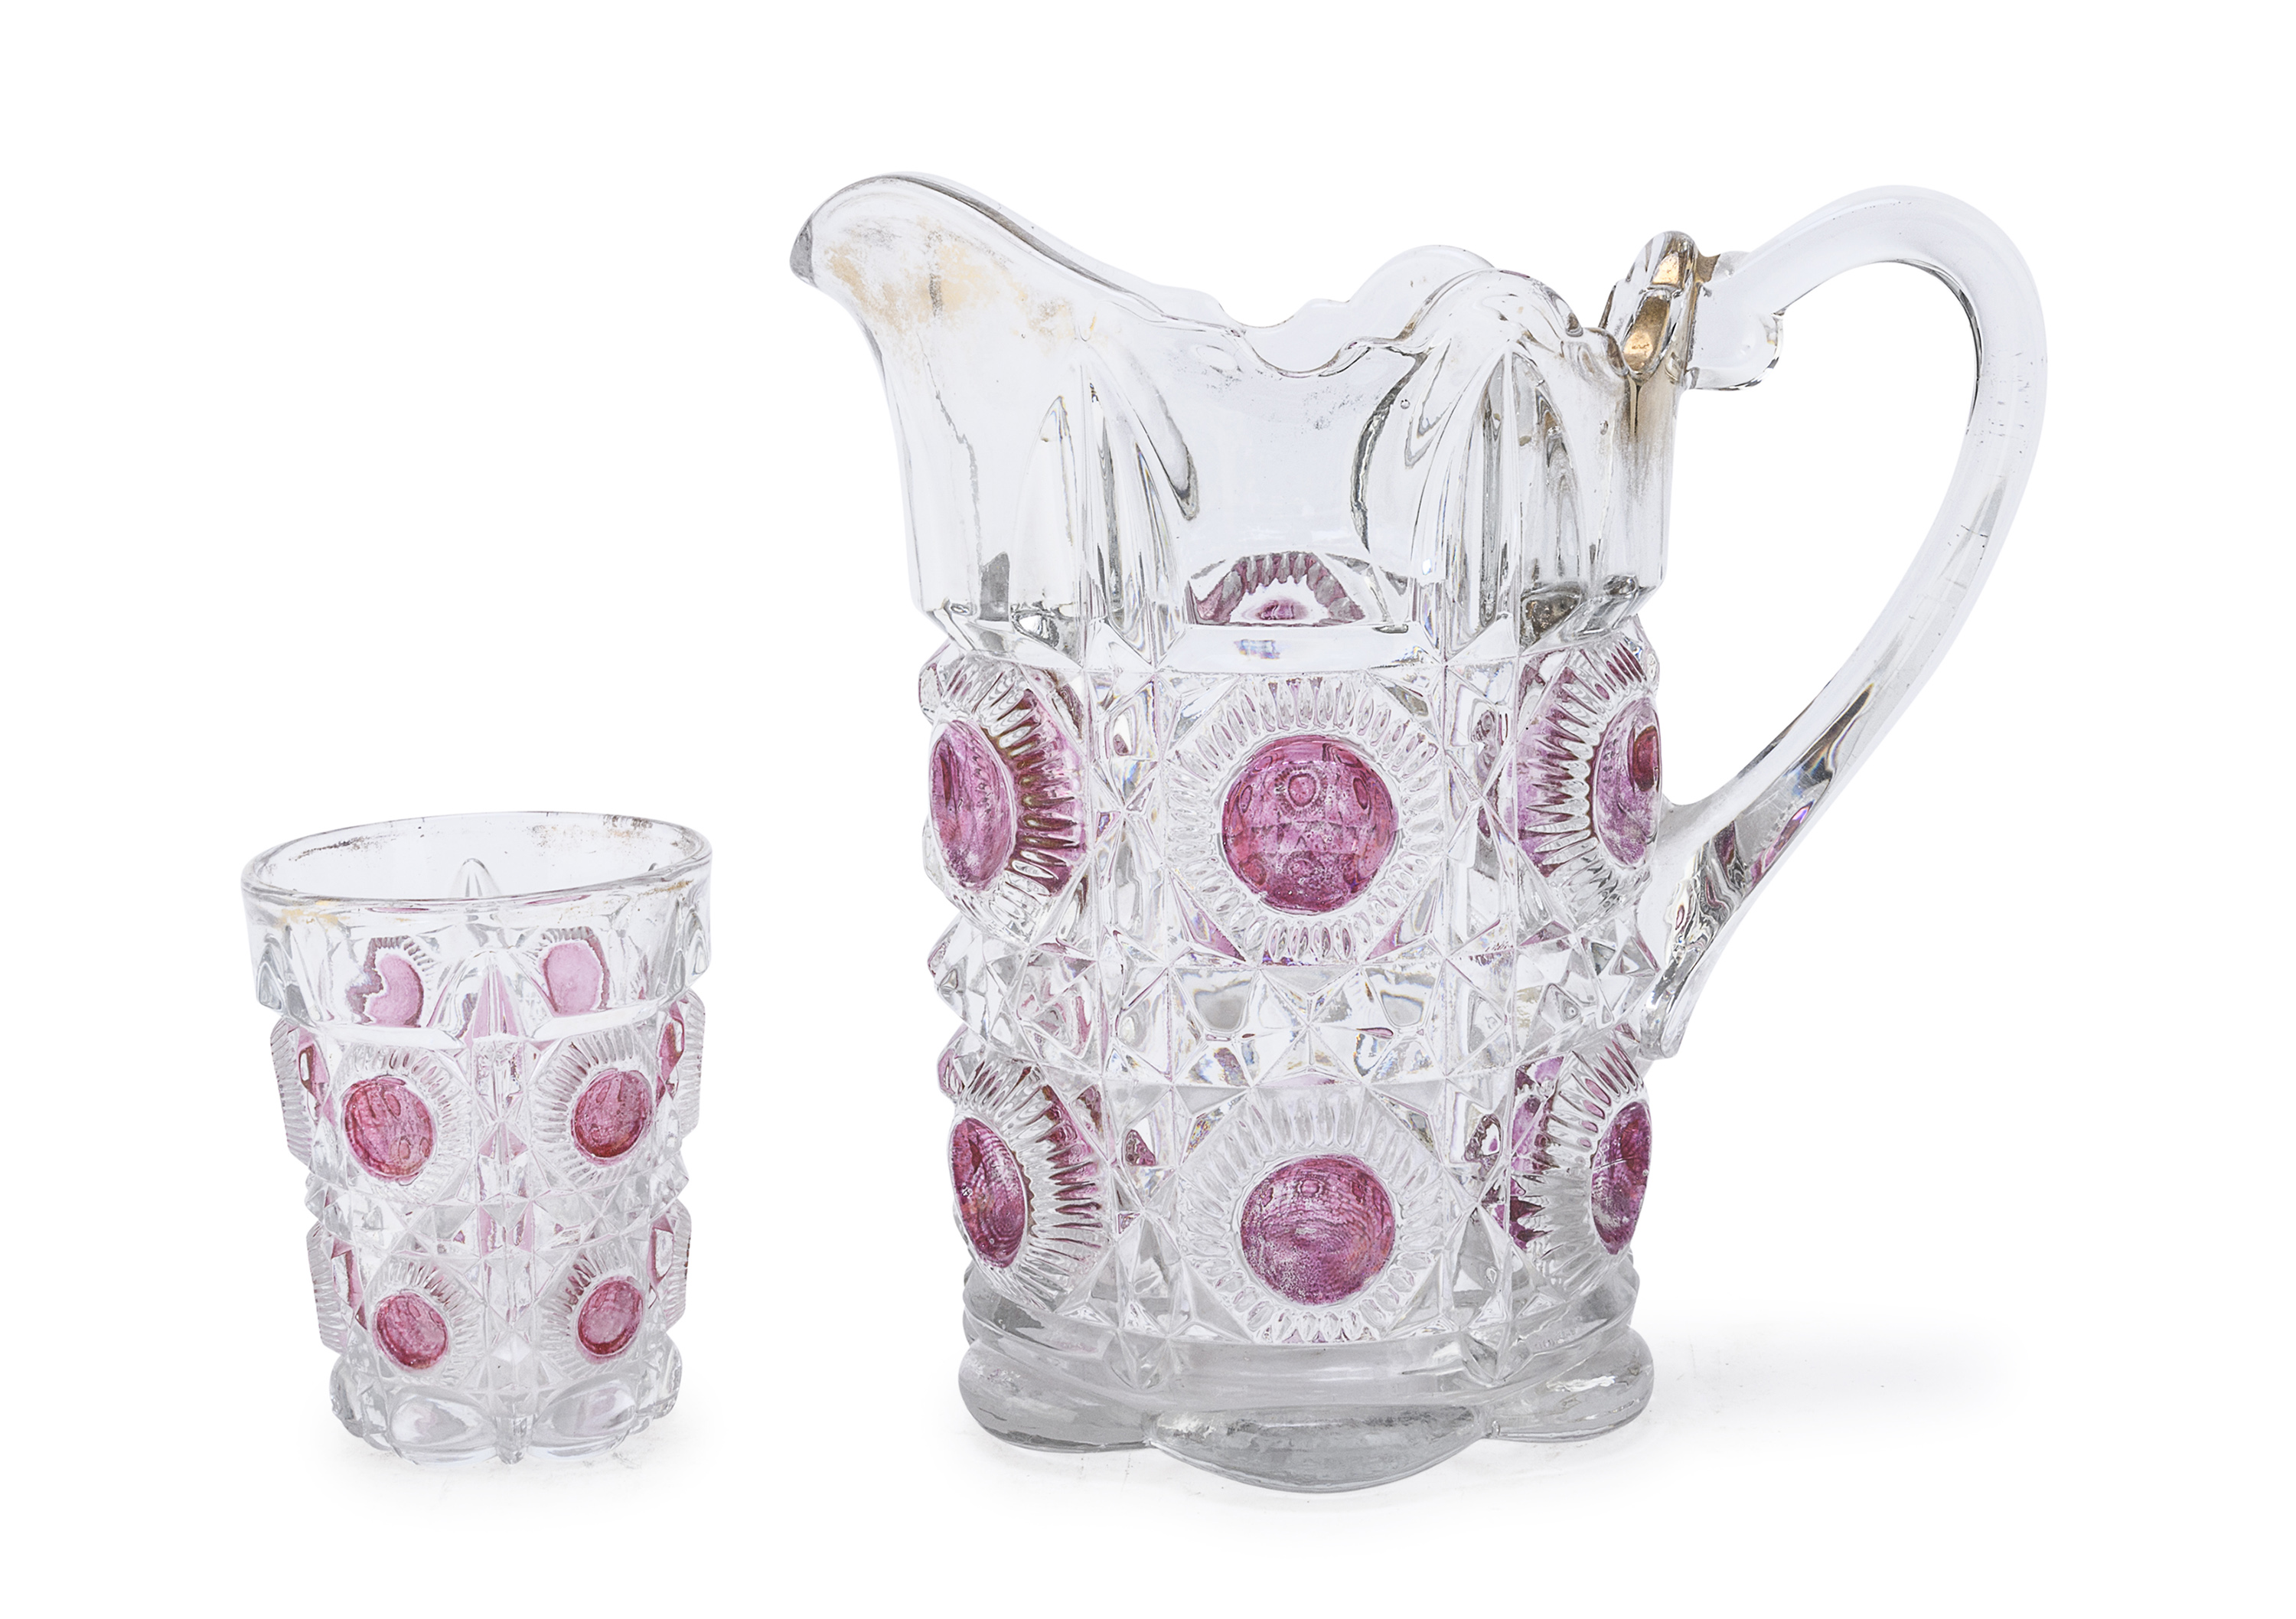 CUT GLASS JUG AND CUP EARLY 20TH CENTURY